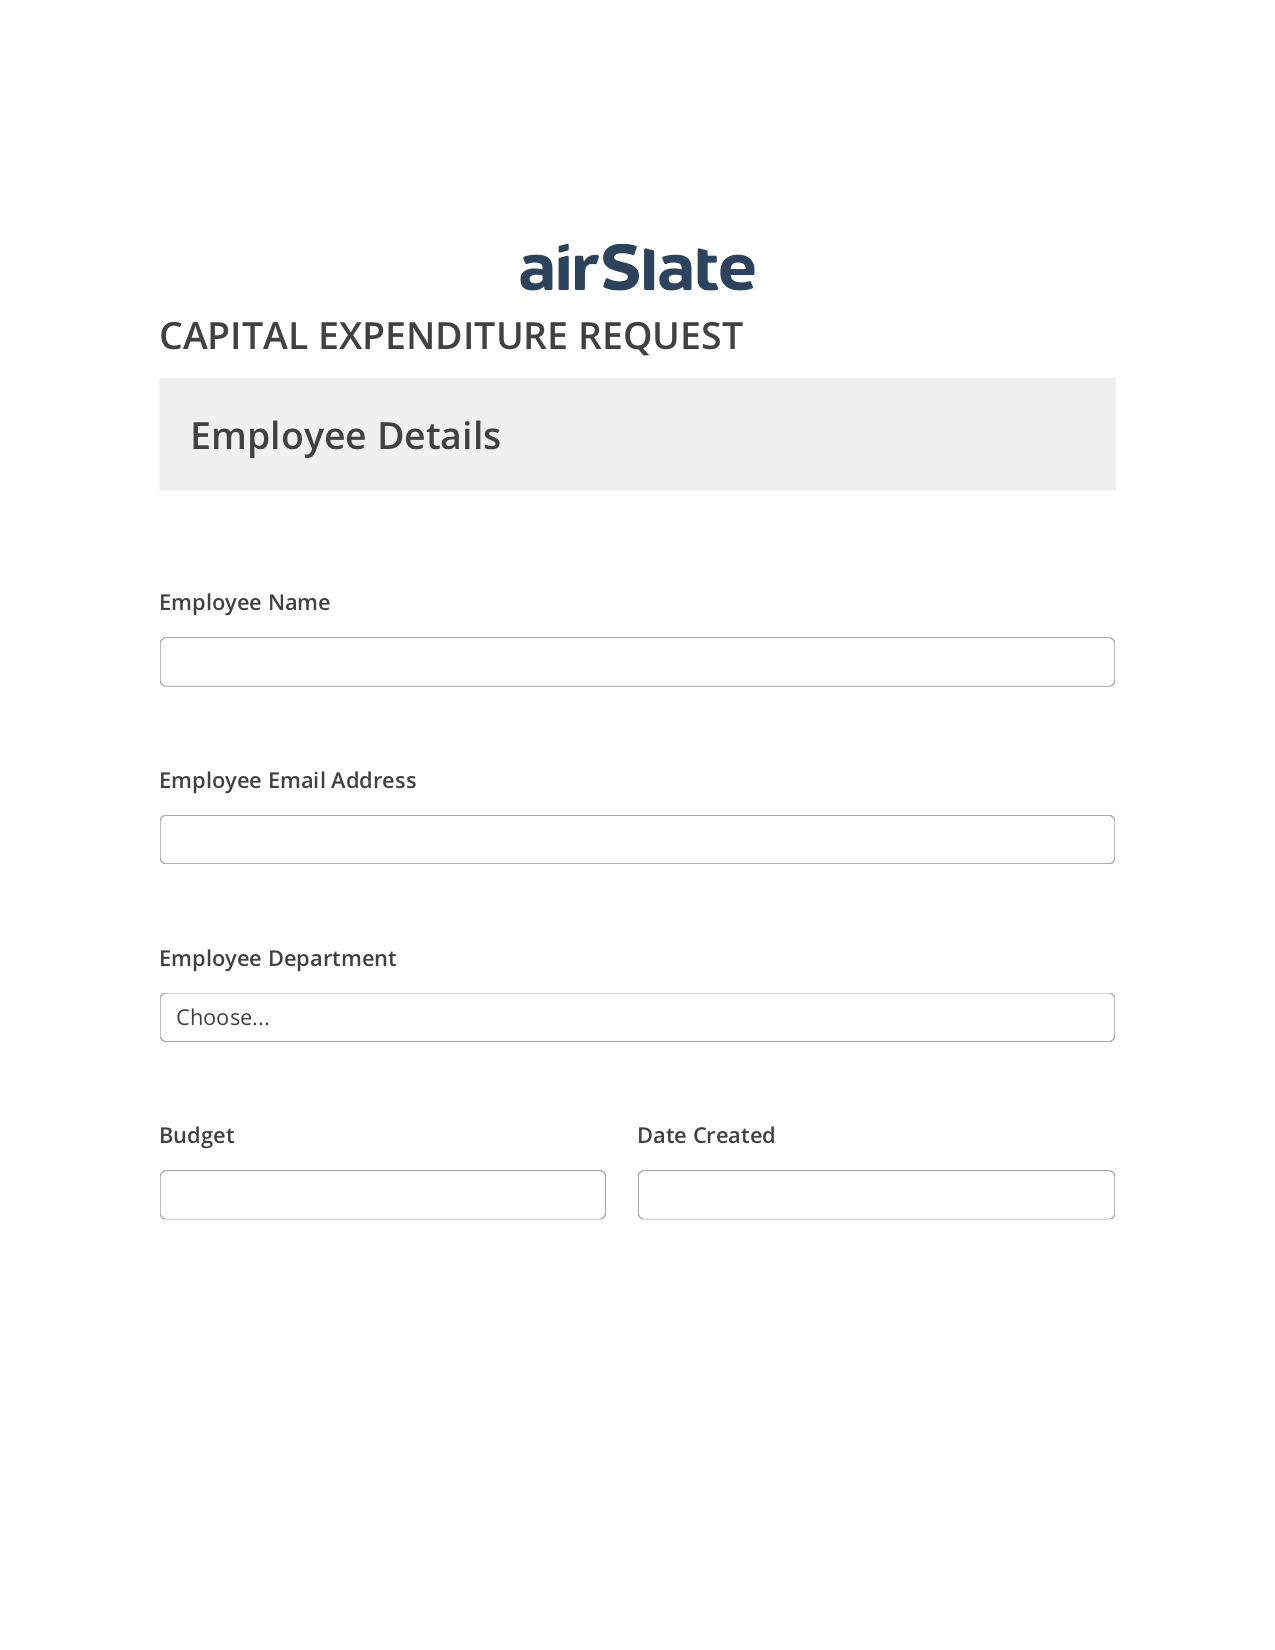 Capital Expenditure Request Approval Workflow Pre-fill from Smartsheet Bot, SendGrid send Campaign bot, Export to WebMerge Bot